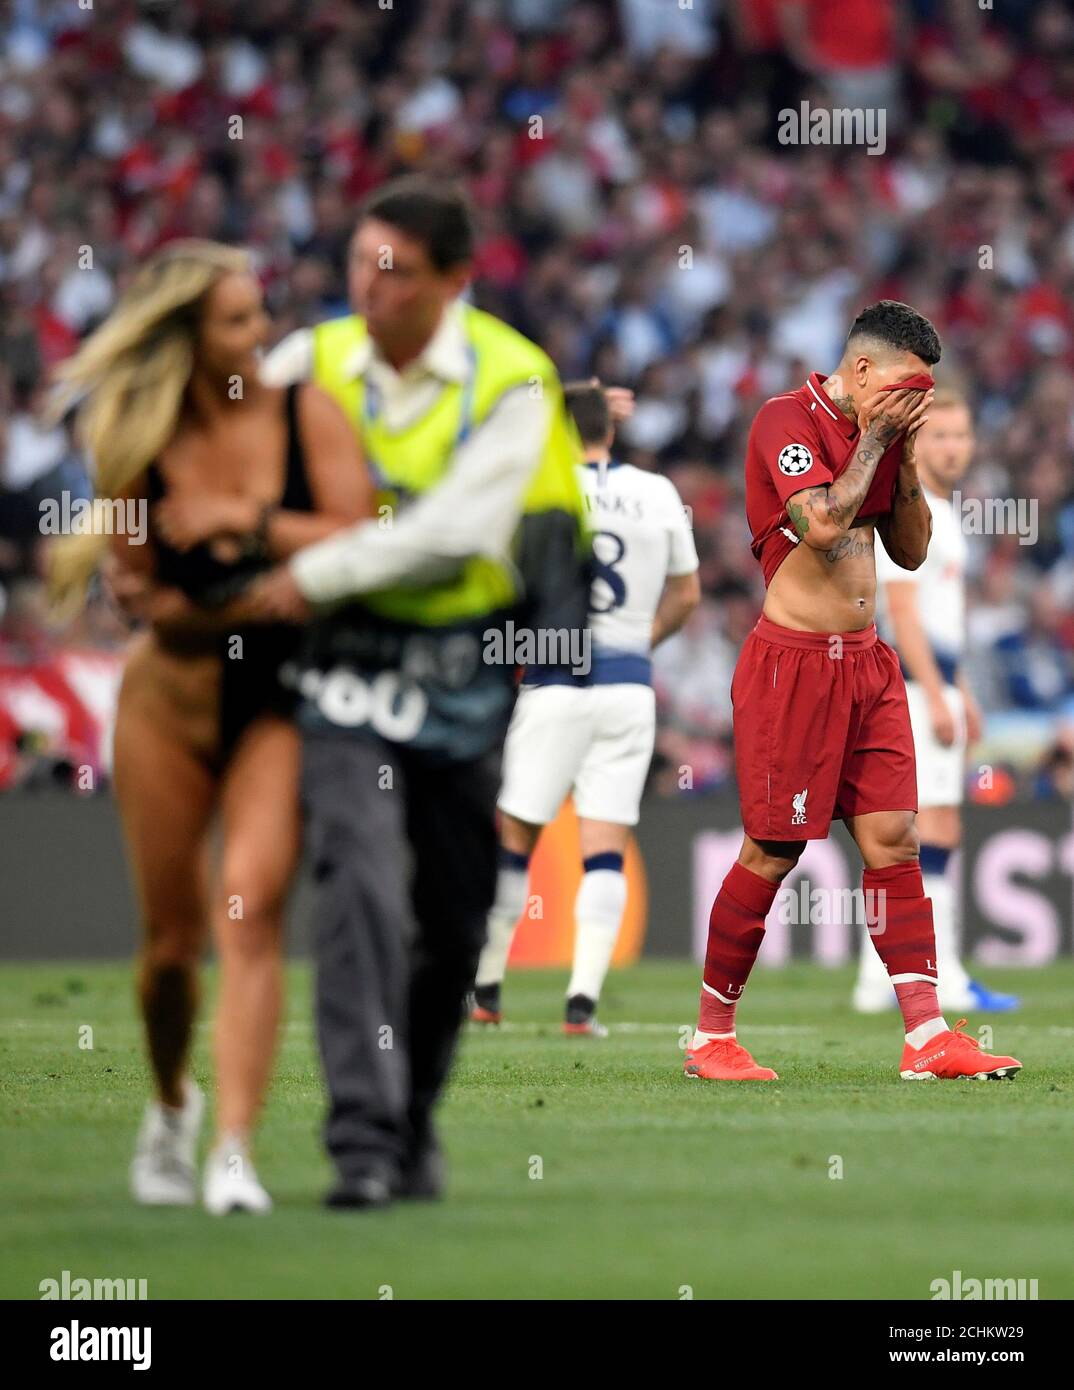 Soccer Football - Champions League Final - Tottenham Hotspur v Liverpool -  Wanda Metropolitano, Madrid, Spain - June 1, 2019 Liverpool's Roberto  Firmino reacts as a pitch invader is apprehended by a